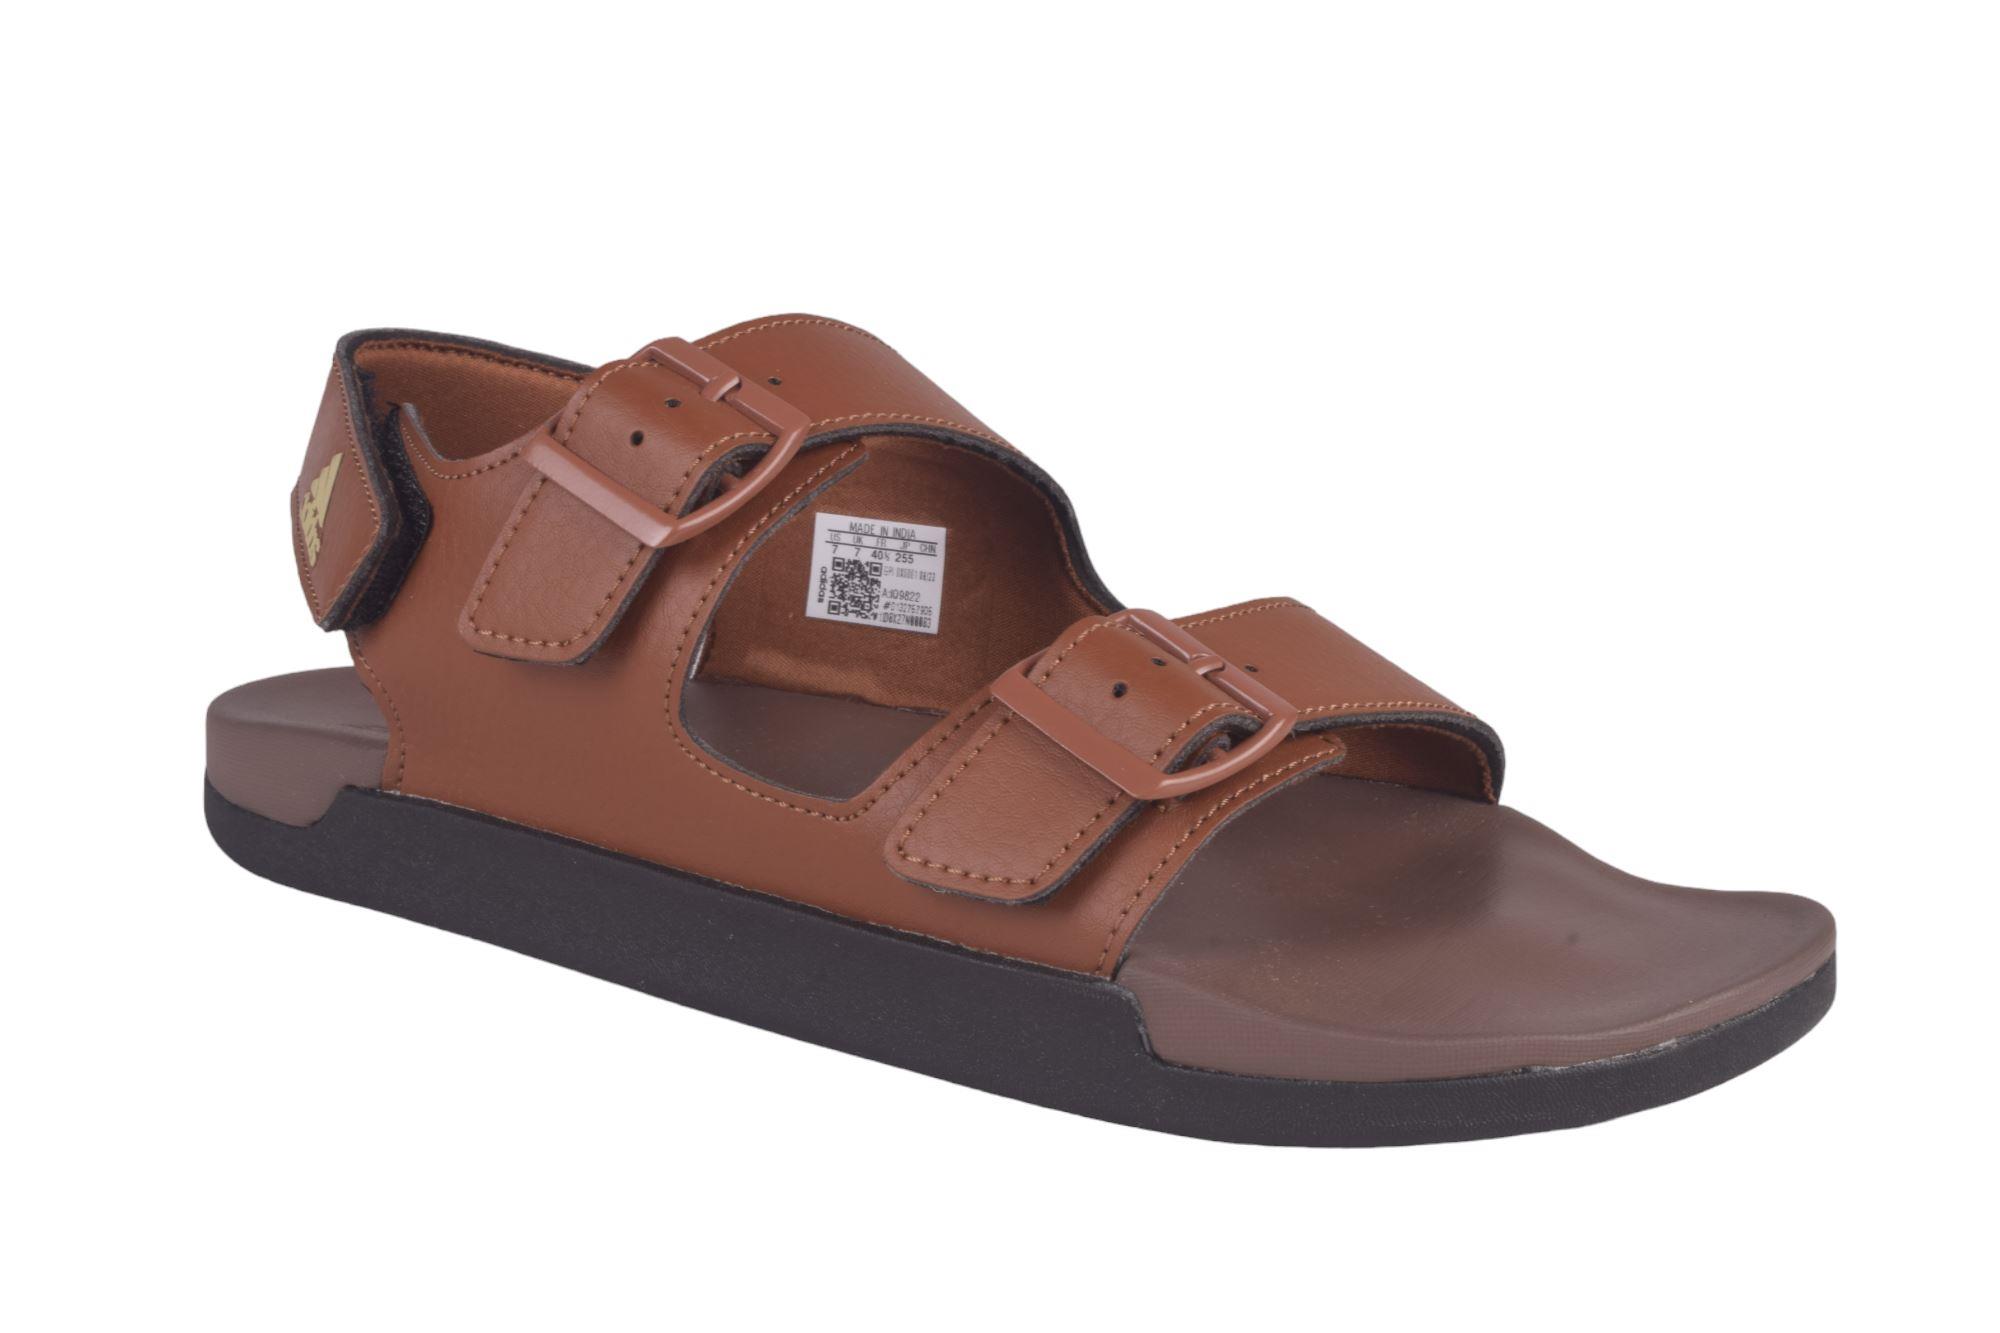 Women's Adidas Sandals - Buy Adidas Sandals for Women Online in India